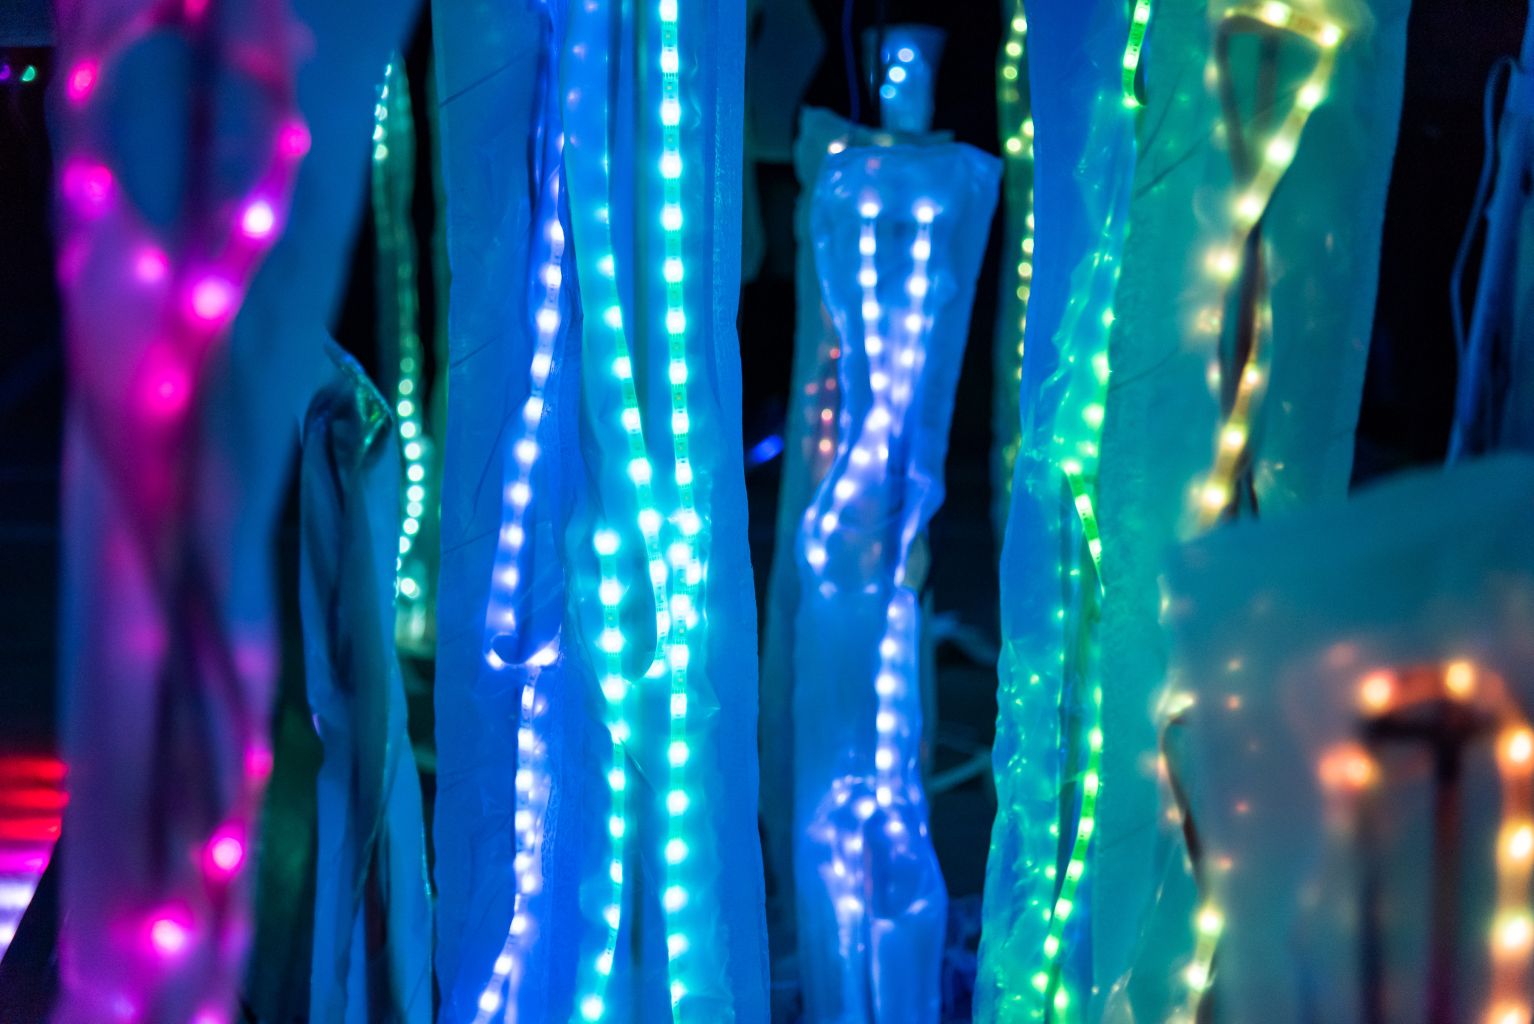 Art installation of sheer fabric tubes with LED lights inside illluminated at night